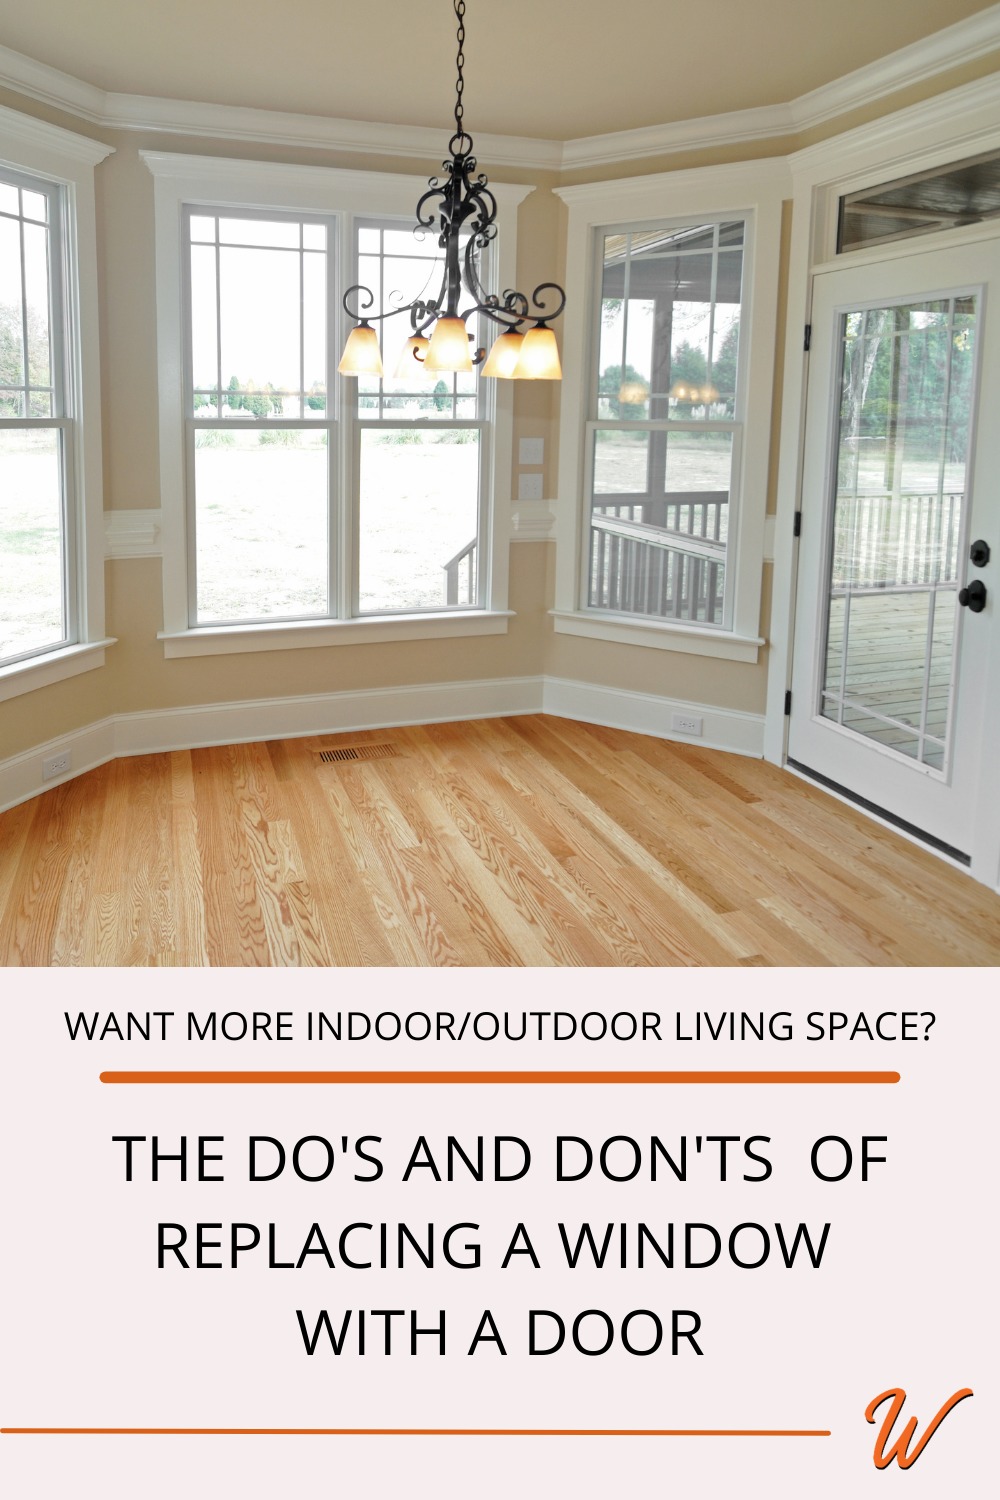 An empty kitchen nook with pine floors, a chandelier, and white windows and a white door out to a screened in porch. Captioned with "Want more indoor/outdoor living space? The Do's and Don'ts of replacing a window with a door"